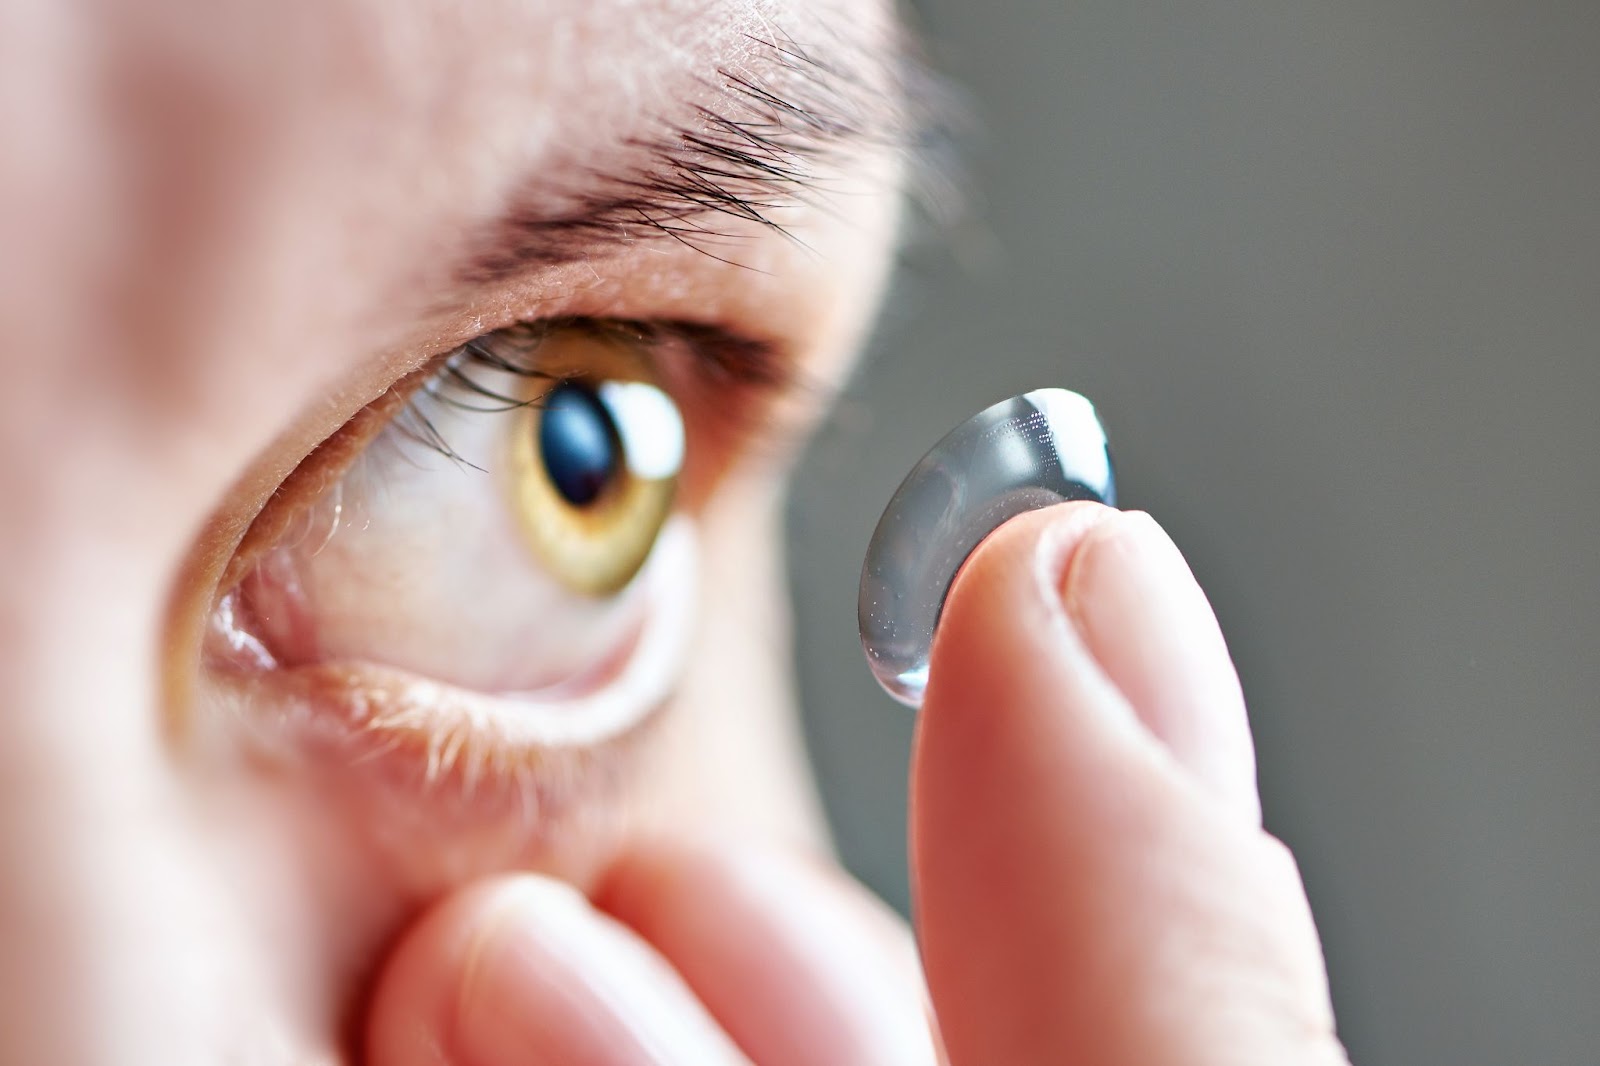 Close up picture of a person holding their eyelid down as they place a contact lens on their eye.
